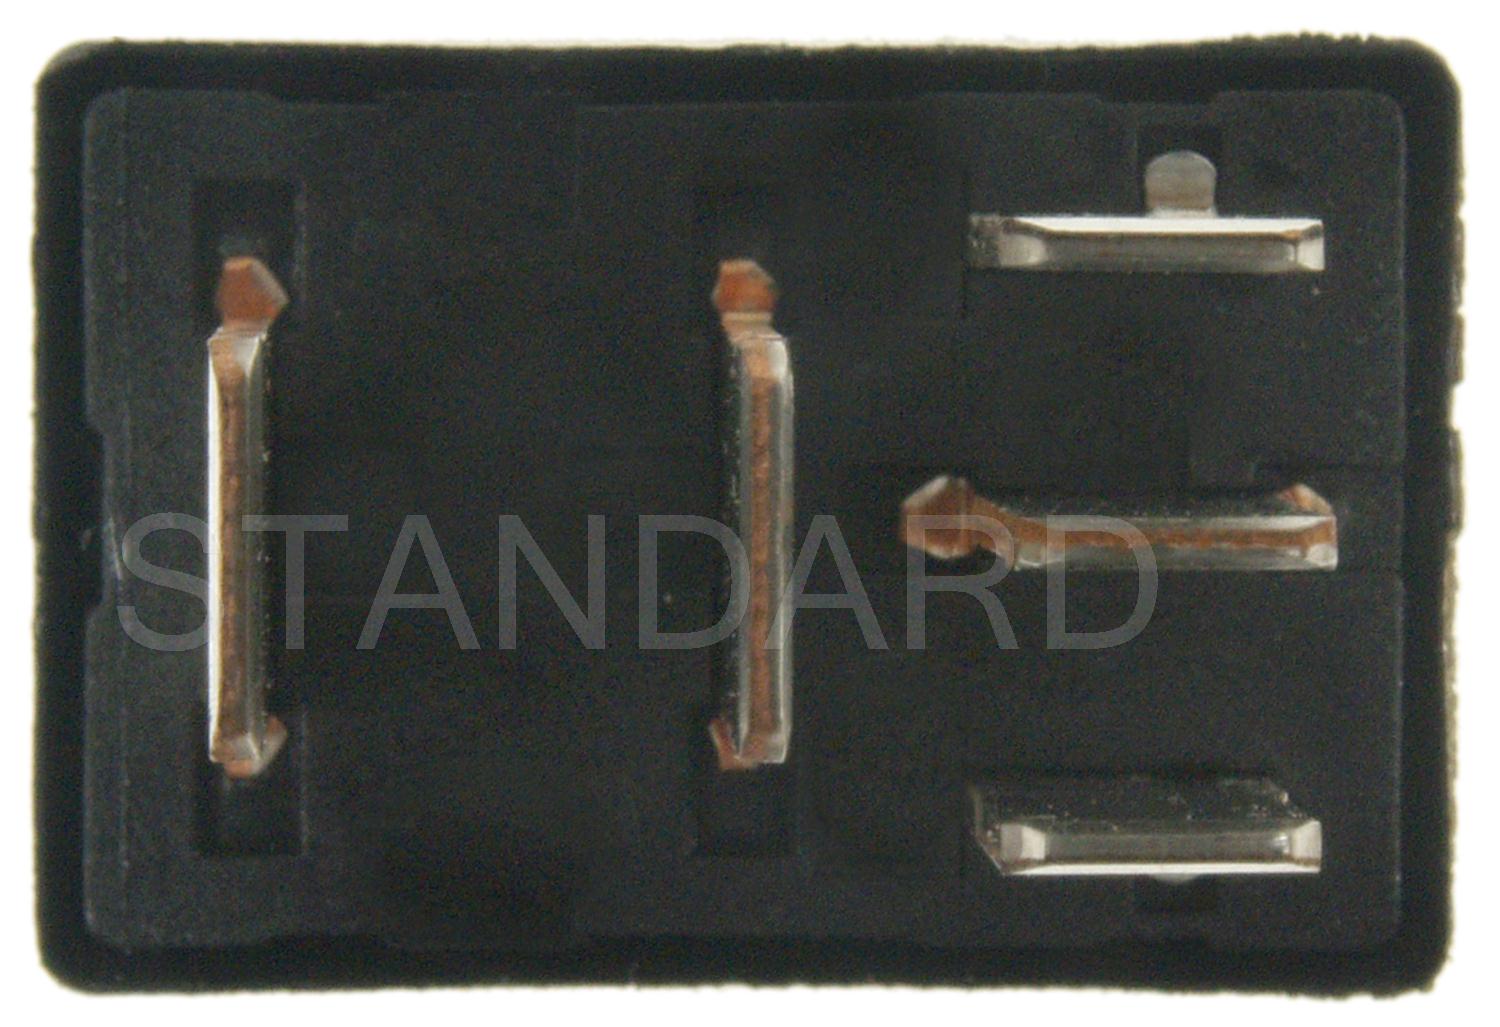 Picture of Standard Motor Products RY1193 Standard Relay